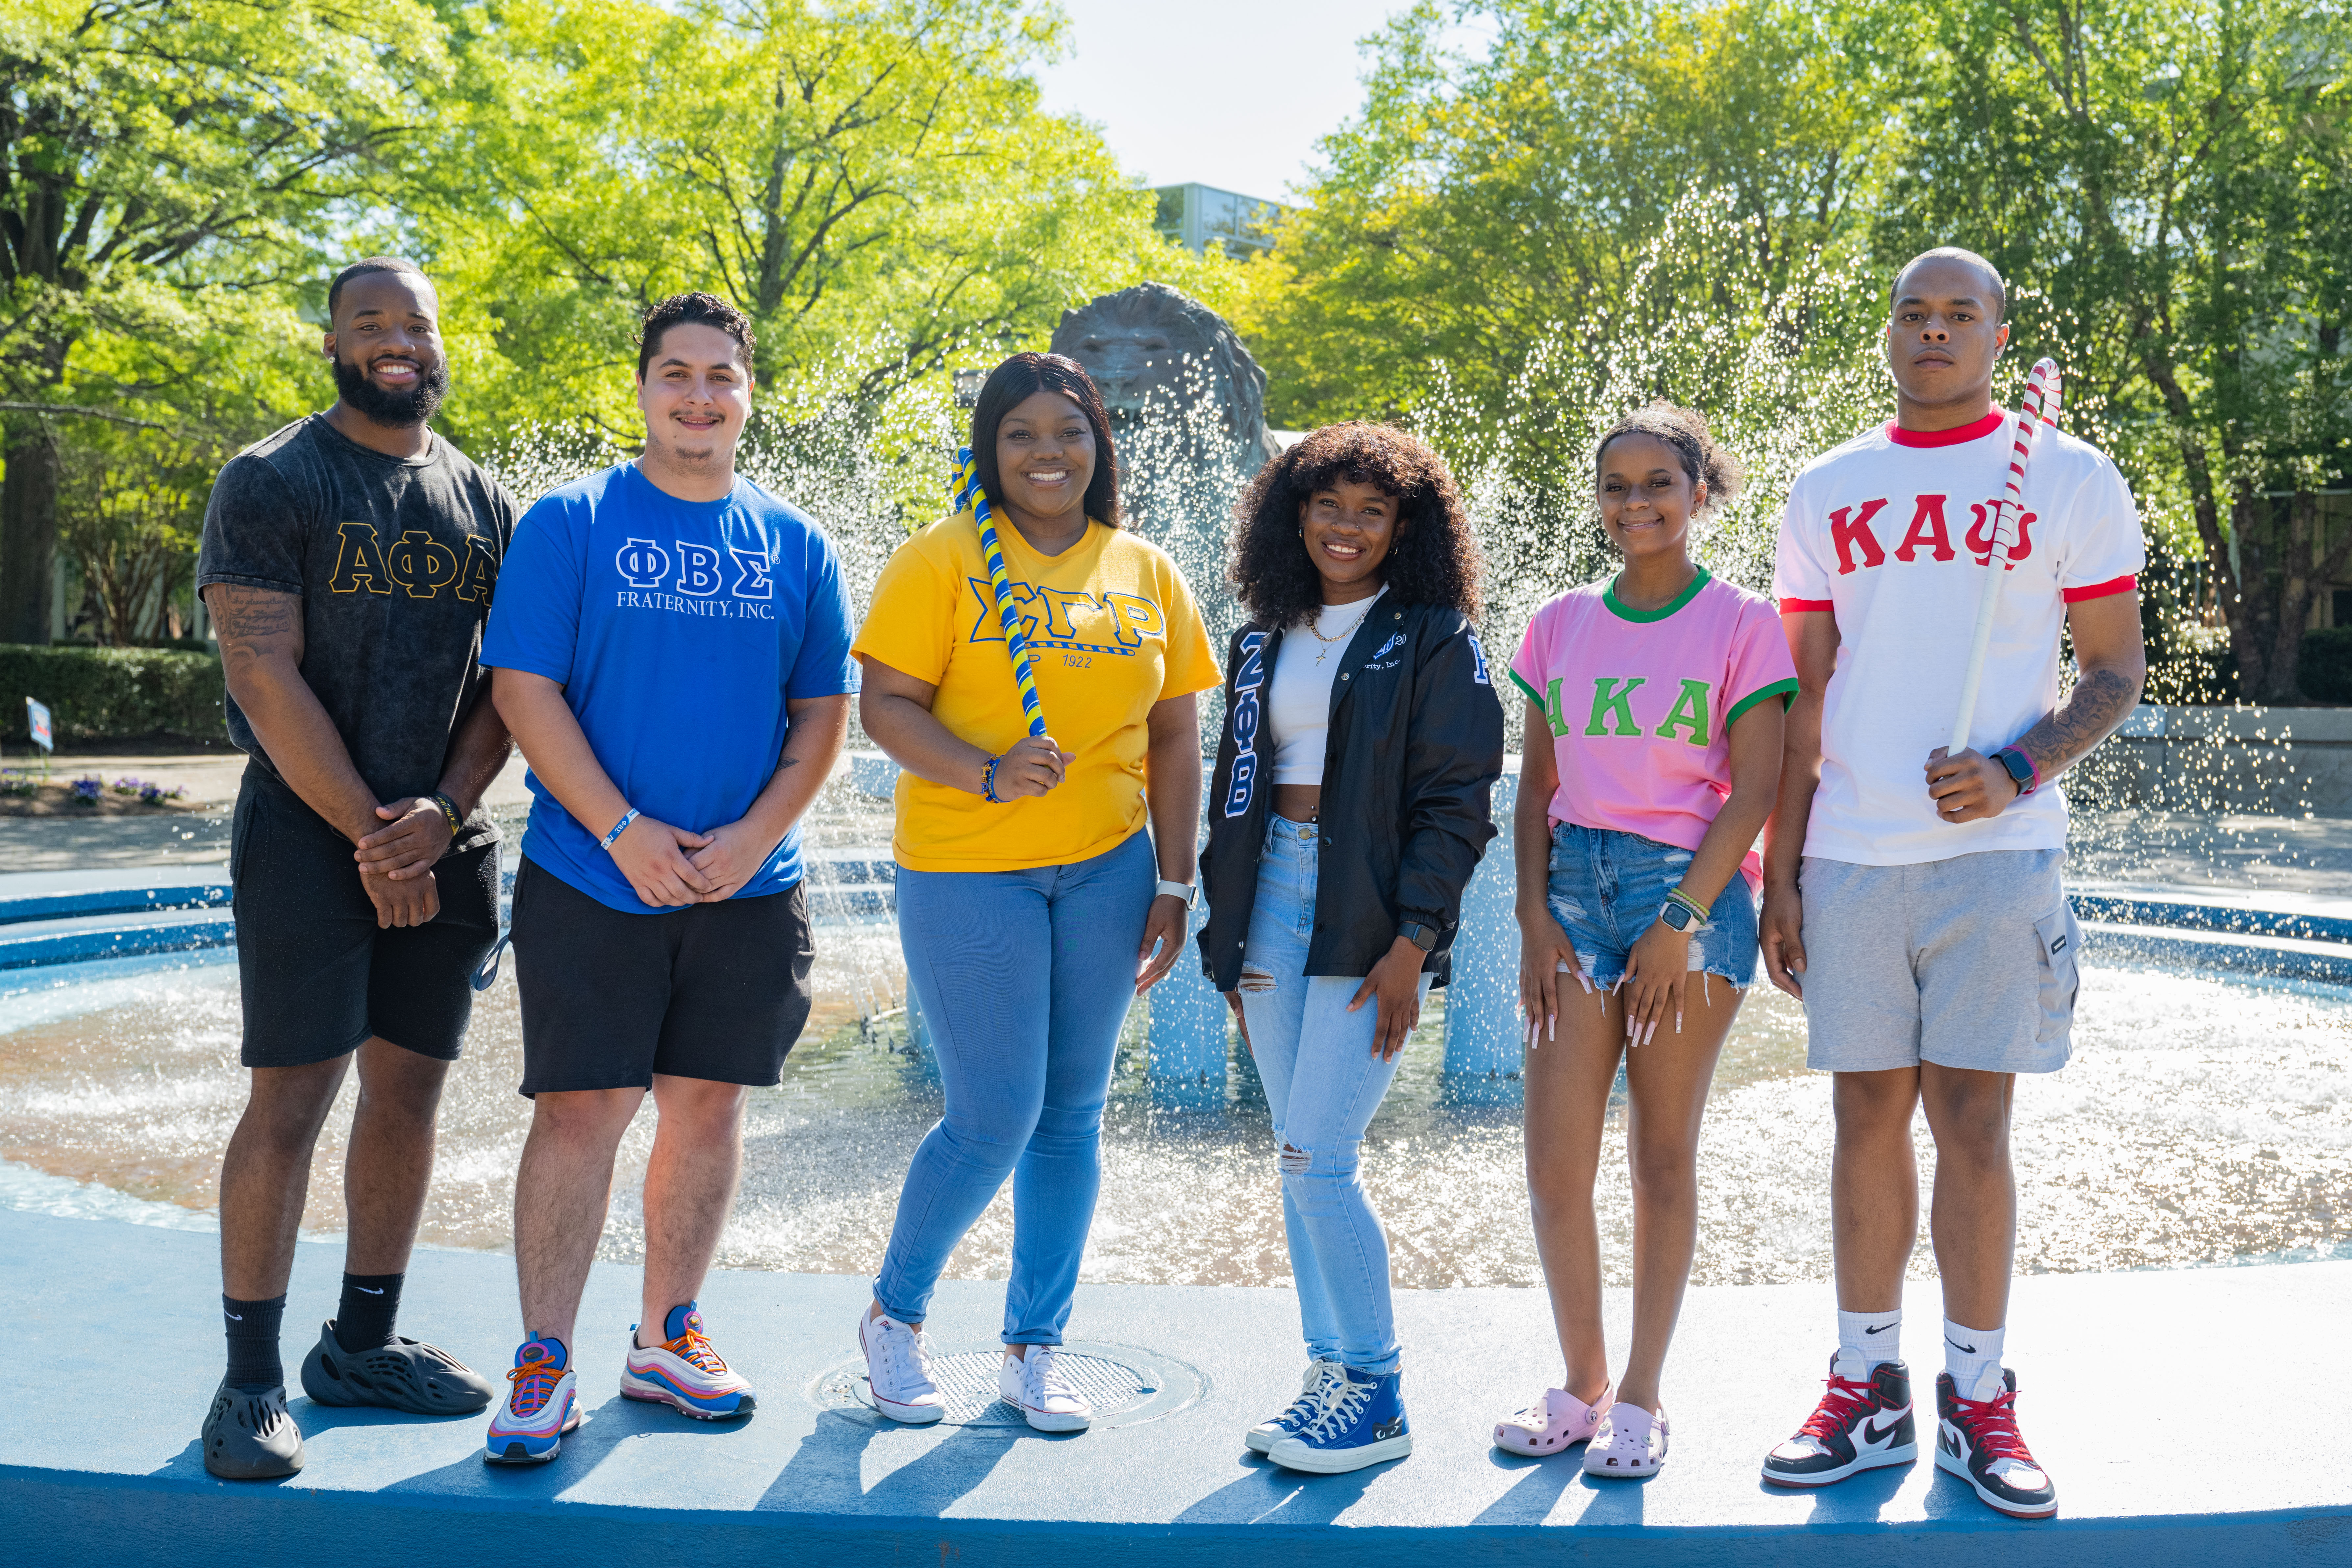 National Pan-Hellenic Council (NPHC) | Old Dominion University